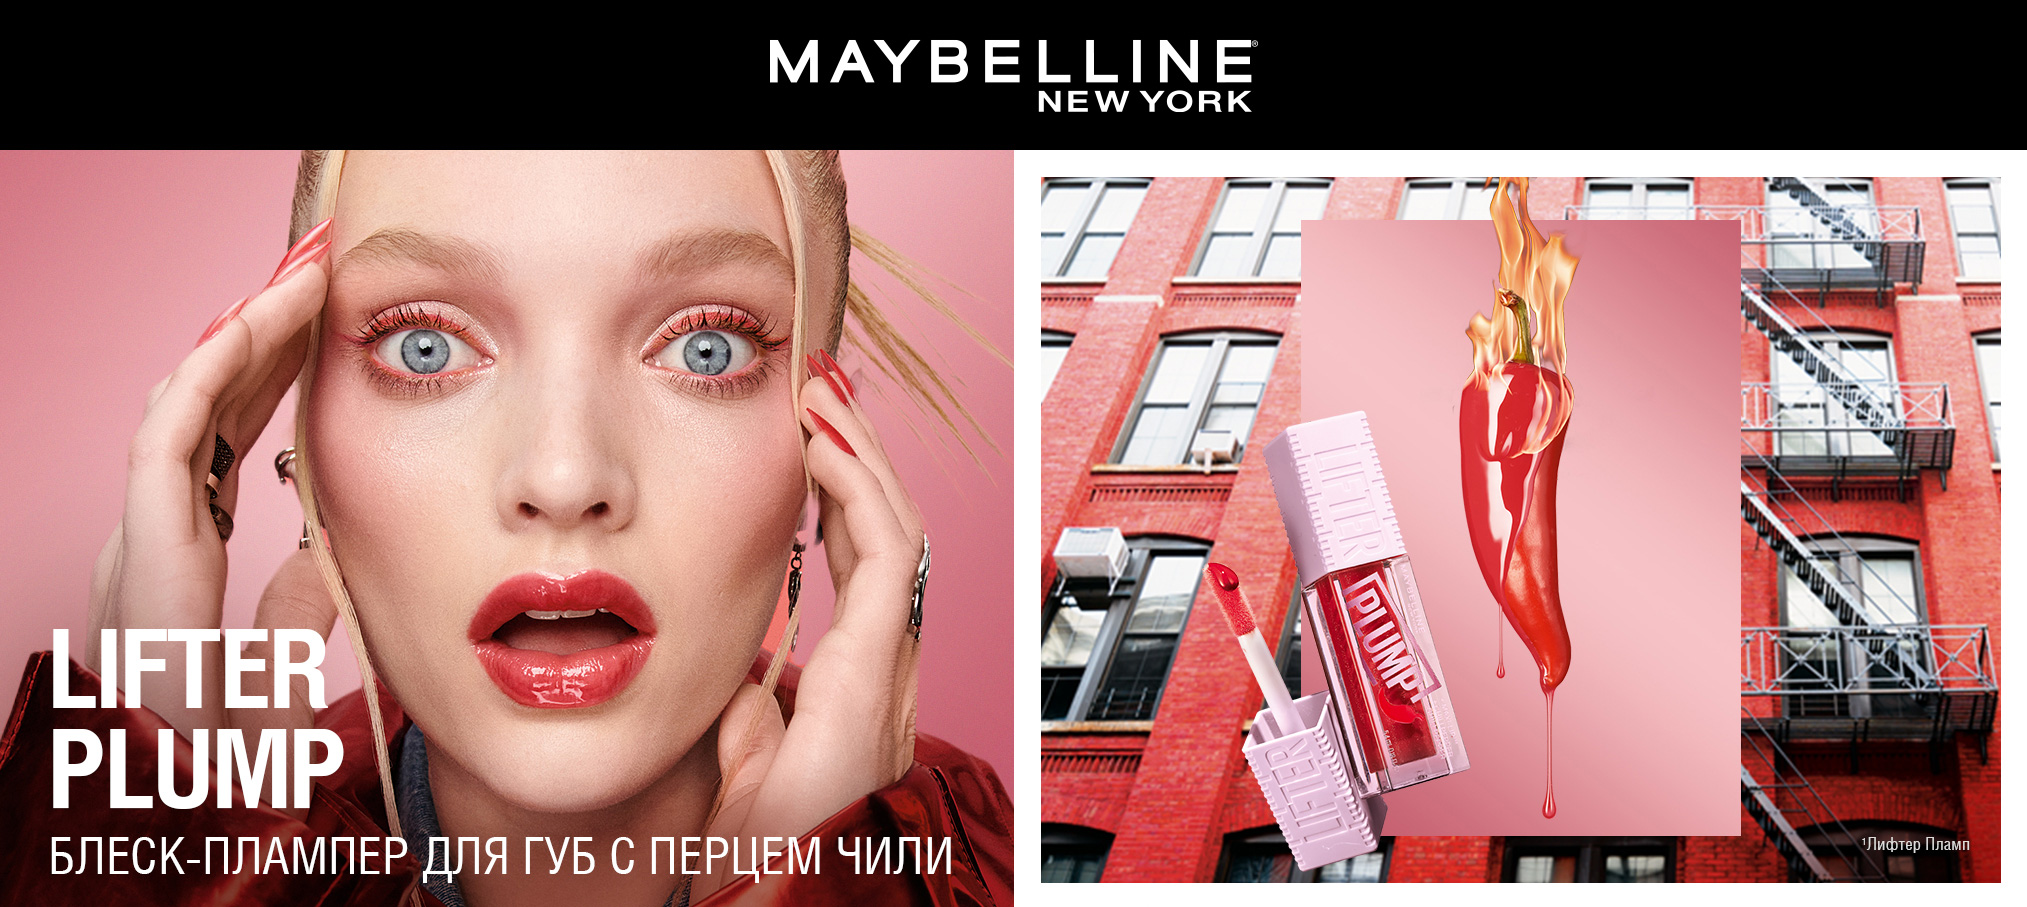 Maybelline New York Lifter Plump